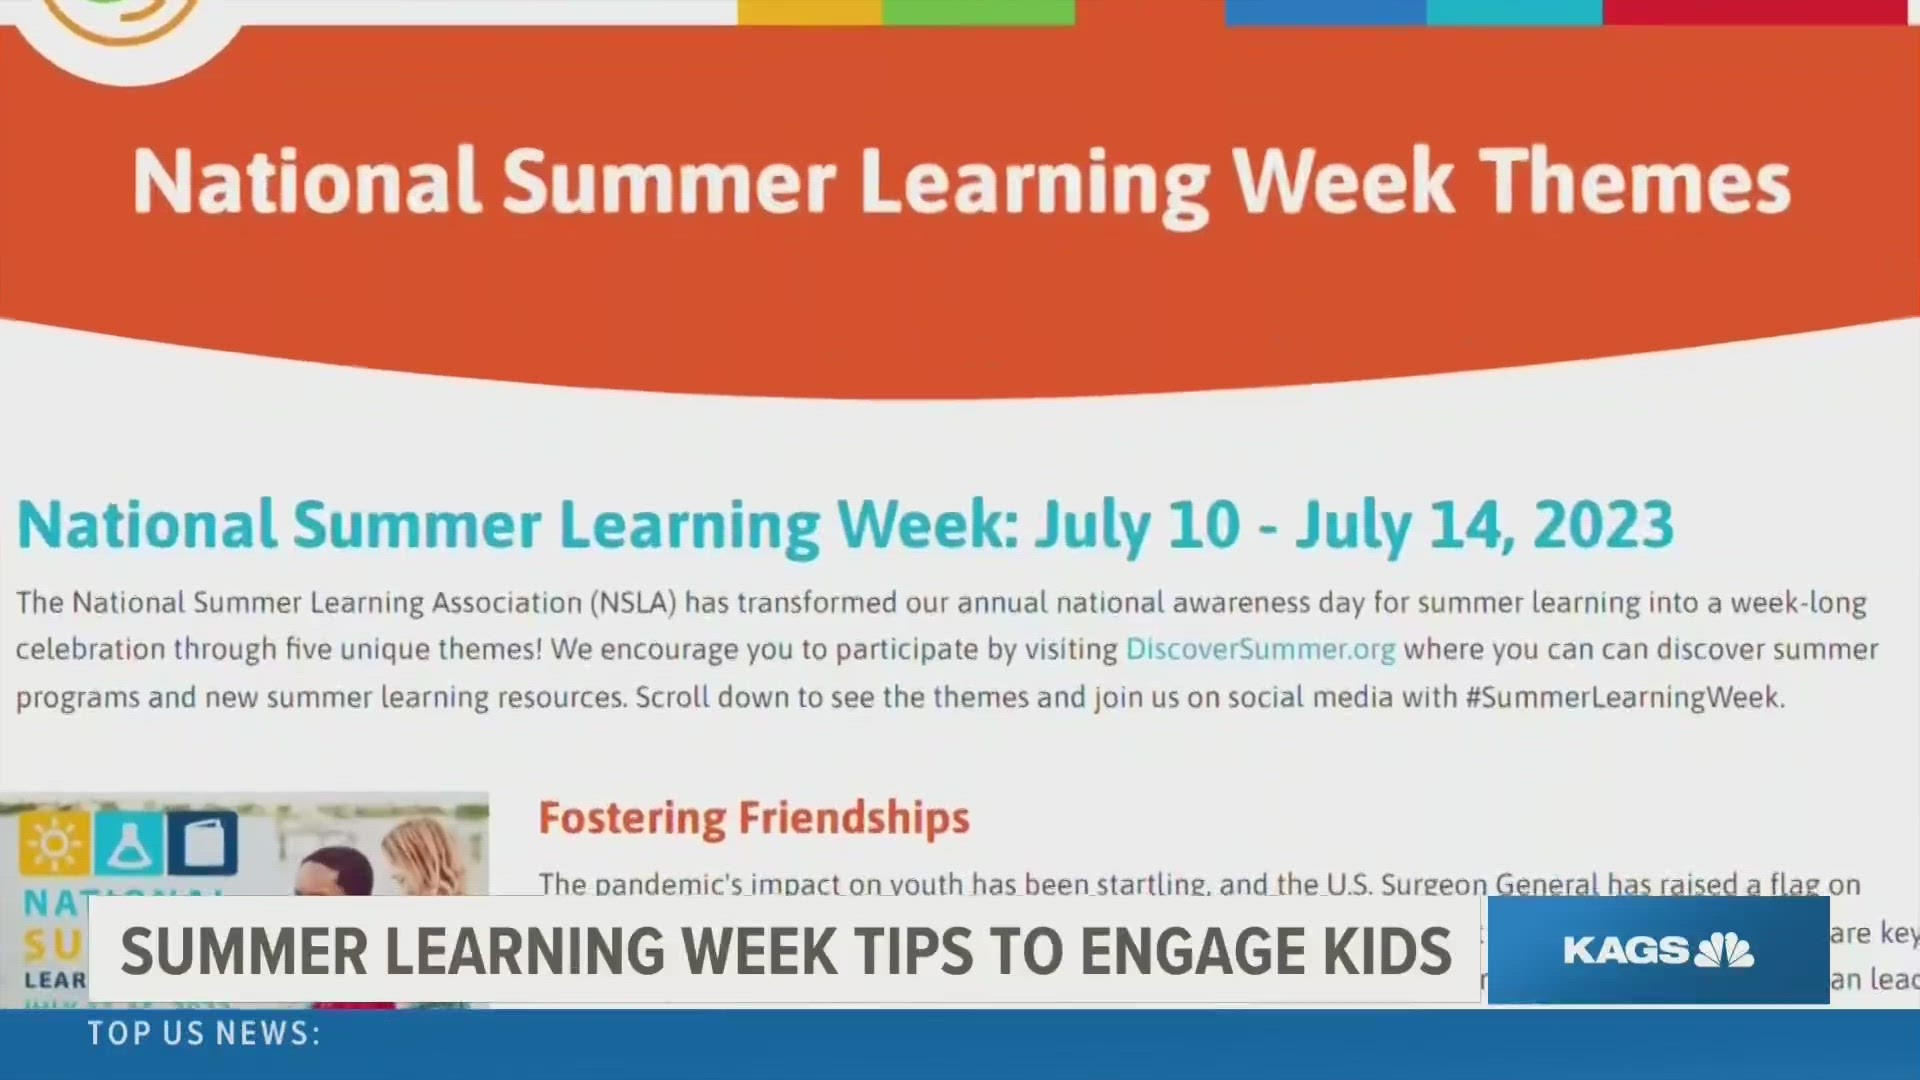 With many children off from school for the summer, an educator discusses how you can keep your children engaged with learning topics throughout the break.